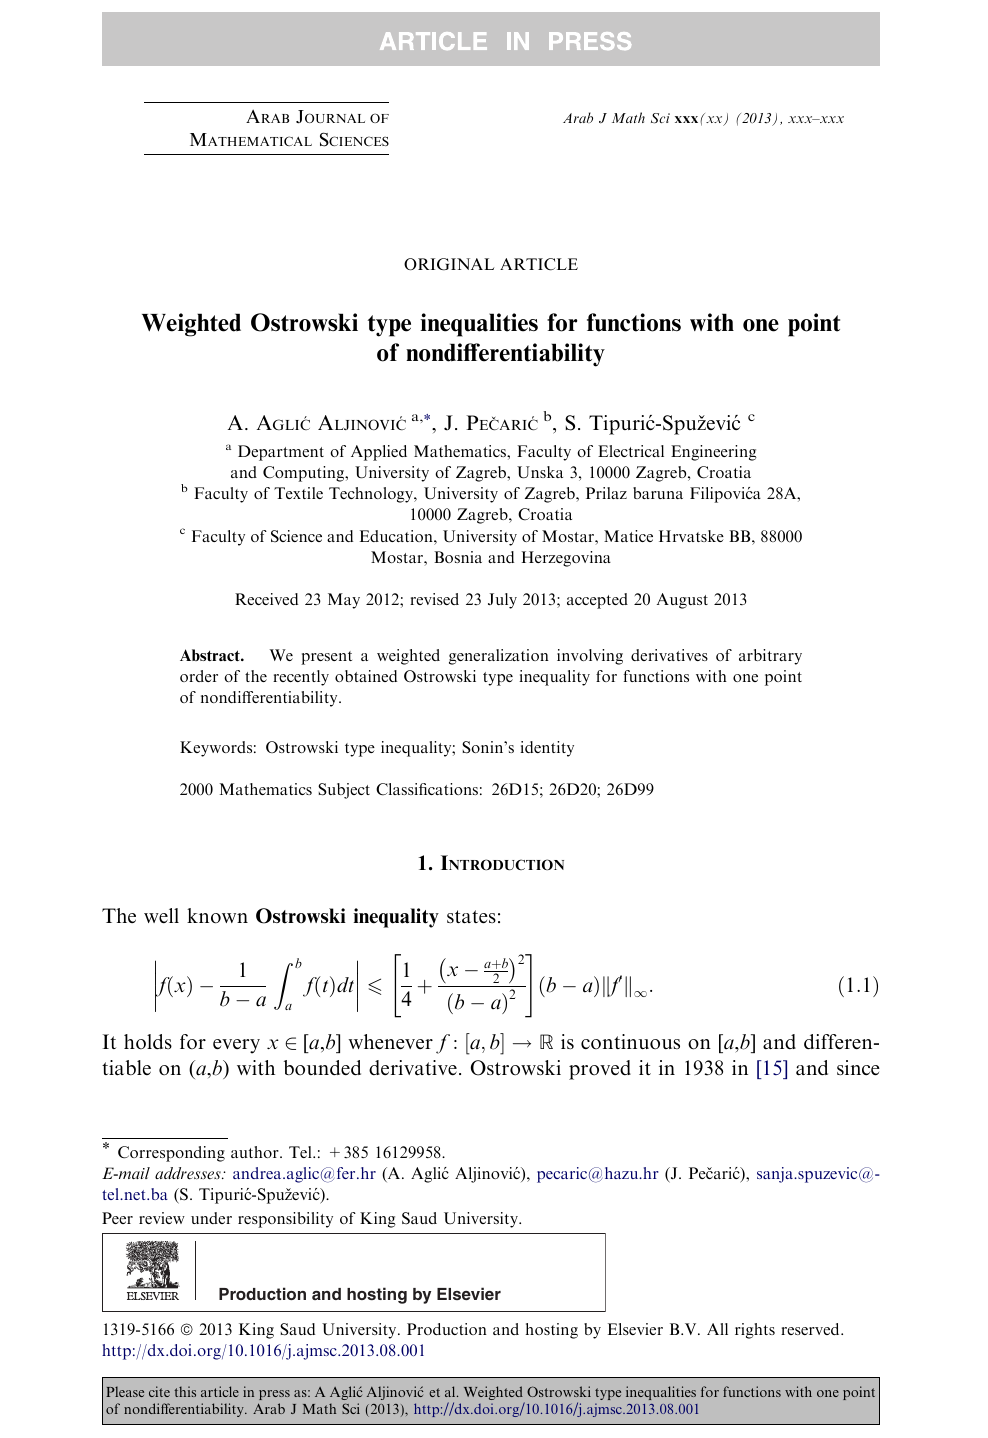 Weighted Ostrowski Type Inequalities For Functions With One Point Of Nondifferentiability Topic Of Research Paper In Mathematics Download Scholarly Article Pdf And Read For Free On Cyberleninka Open Science Hub